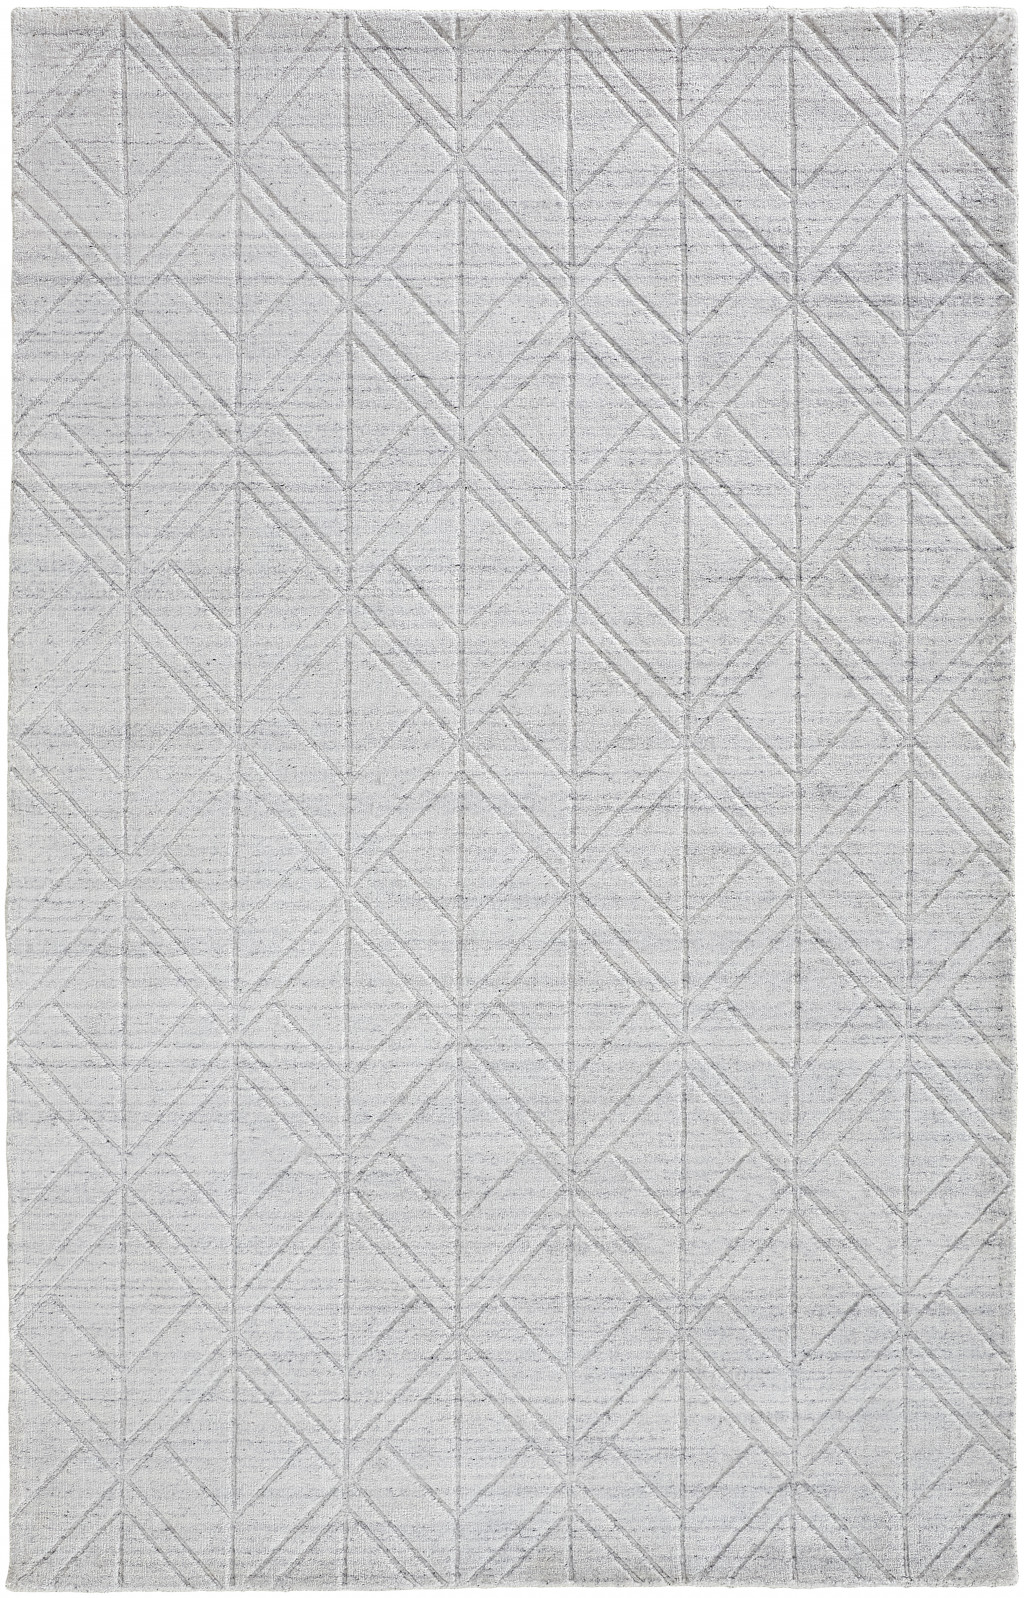 8' X 10' White And Silver Striped Hand Woven Area Rug-514779-1